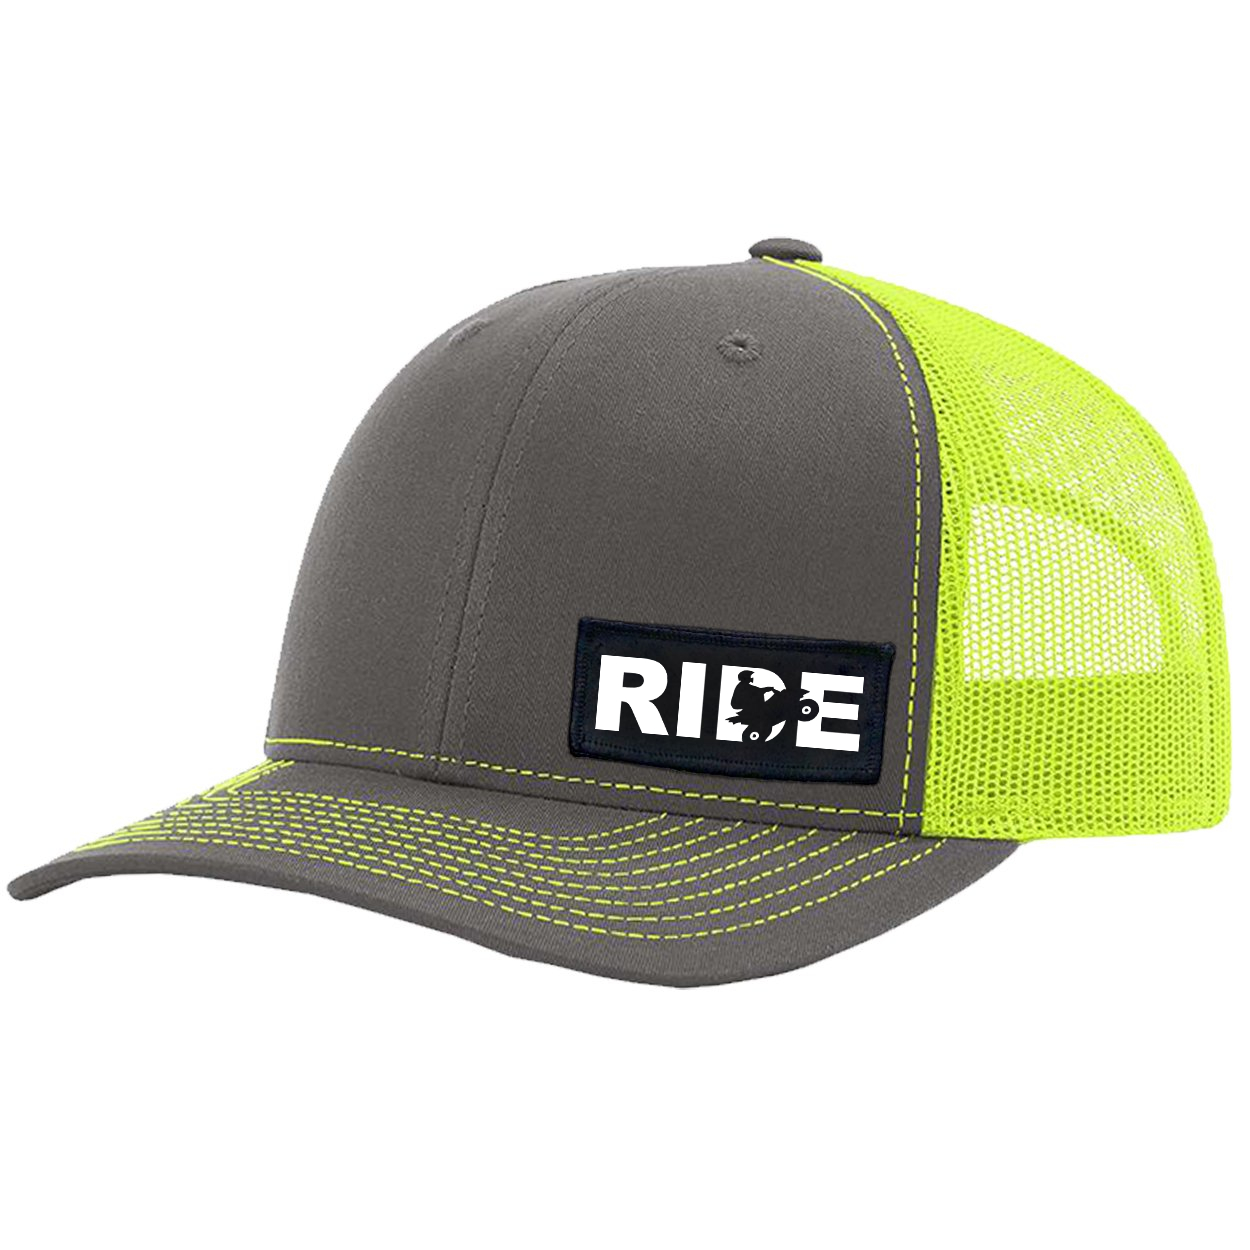 Ride ATV Logo Night Out Woven Patch Snapback Trucker Hat Charcoal/Neon Yellow (White Logo)